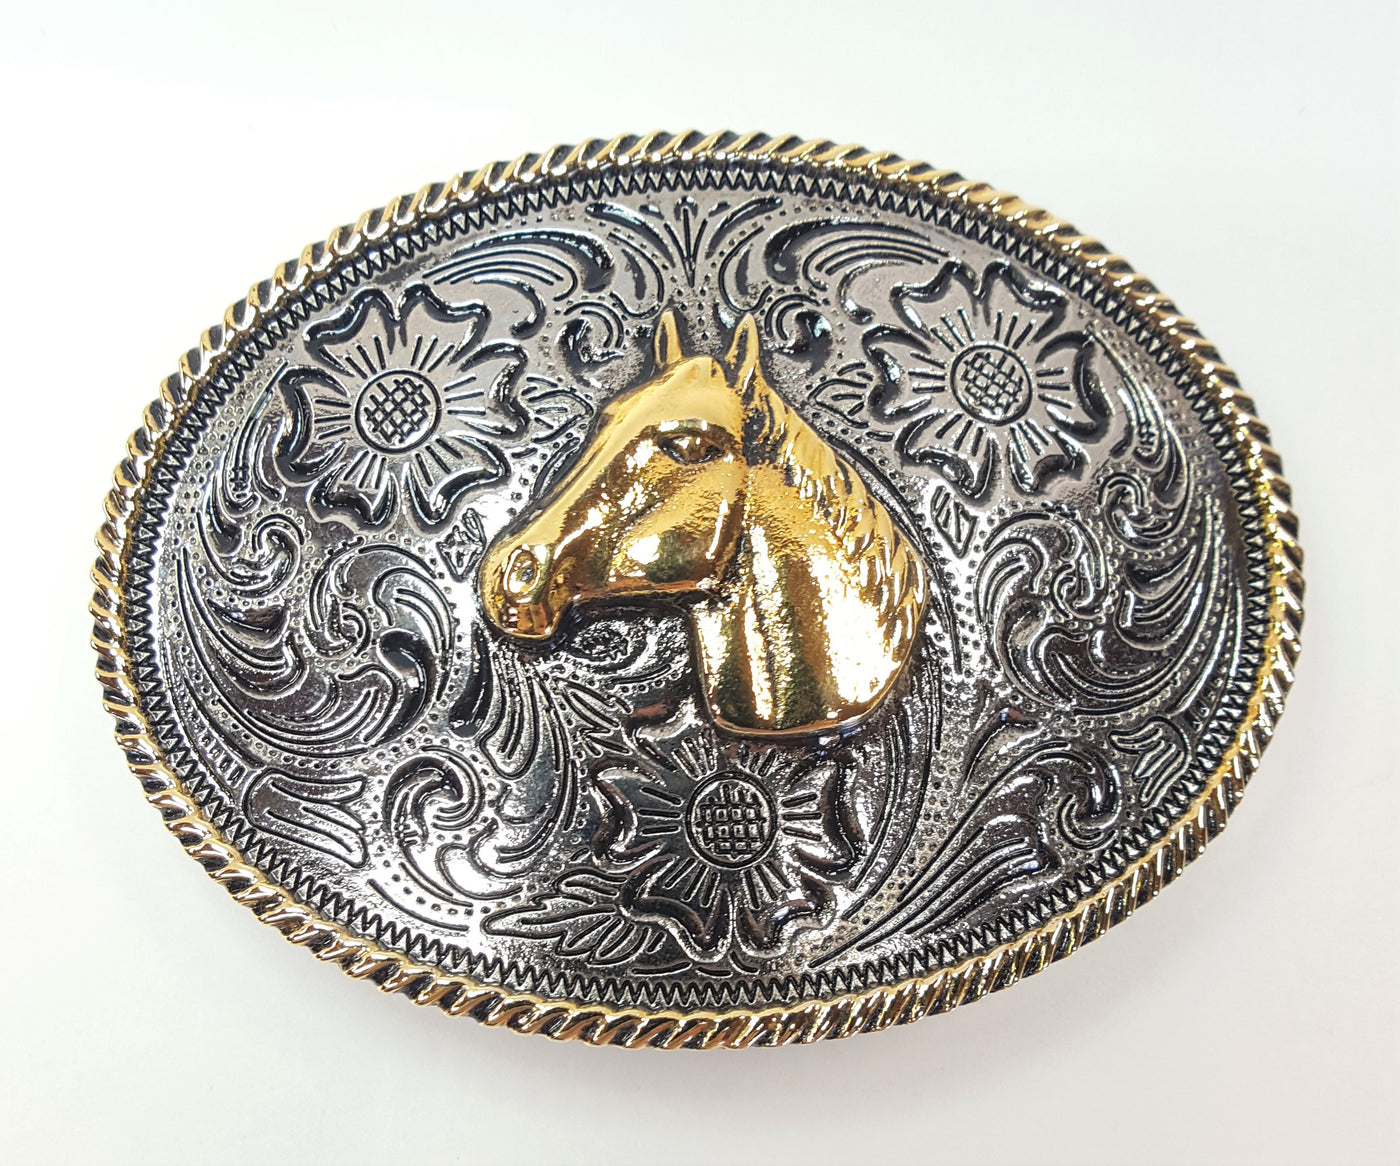 Horsehead buckle by AndWest pictures a chrome colored background with Western scroll and flowered pattern.  Edge of the oval buckle has gold colored rope pattern along the edge and horse head is gold colored and centered on buckle. Works great for child's belt or adult who wants a smaller buckle Fits belt widths up to 1 1/4" Dimensions are 2 3/8" tall by 3 1/4" wide Available in our online store and also in the retail shop in Smyrna, TN, just outside of Nashville.